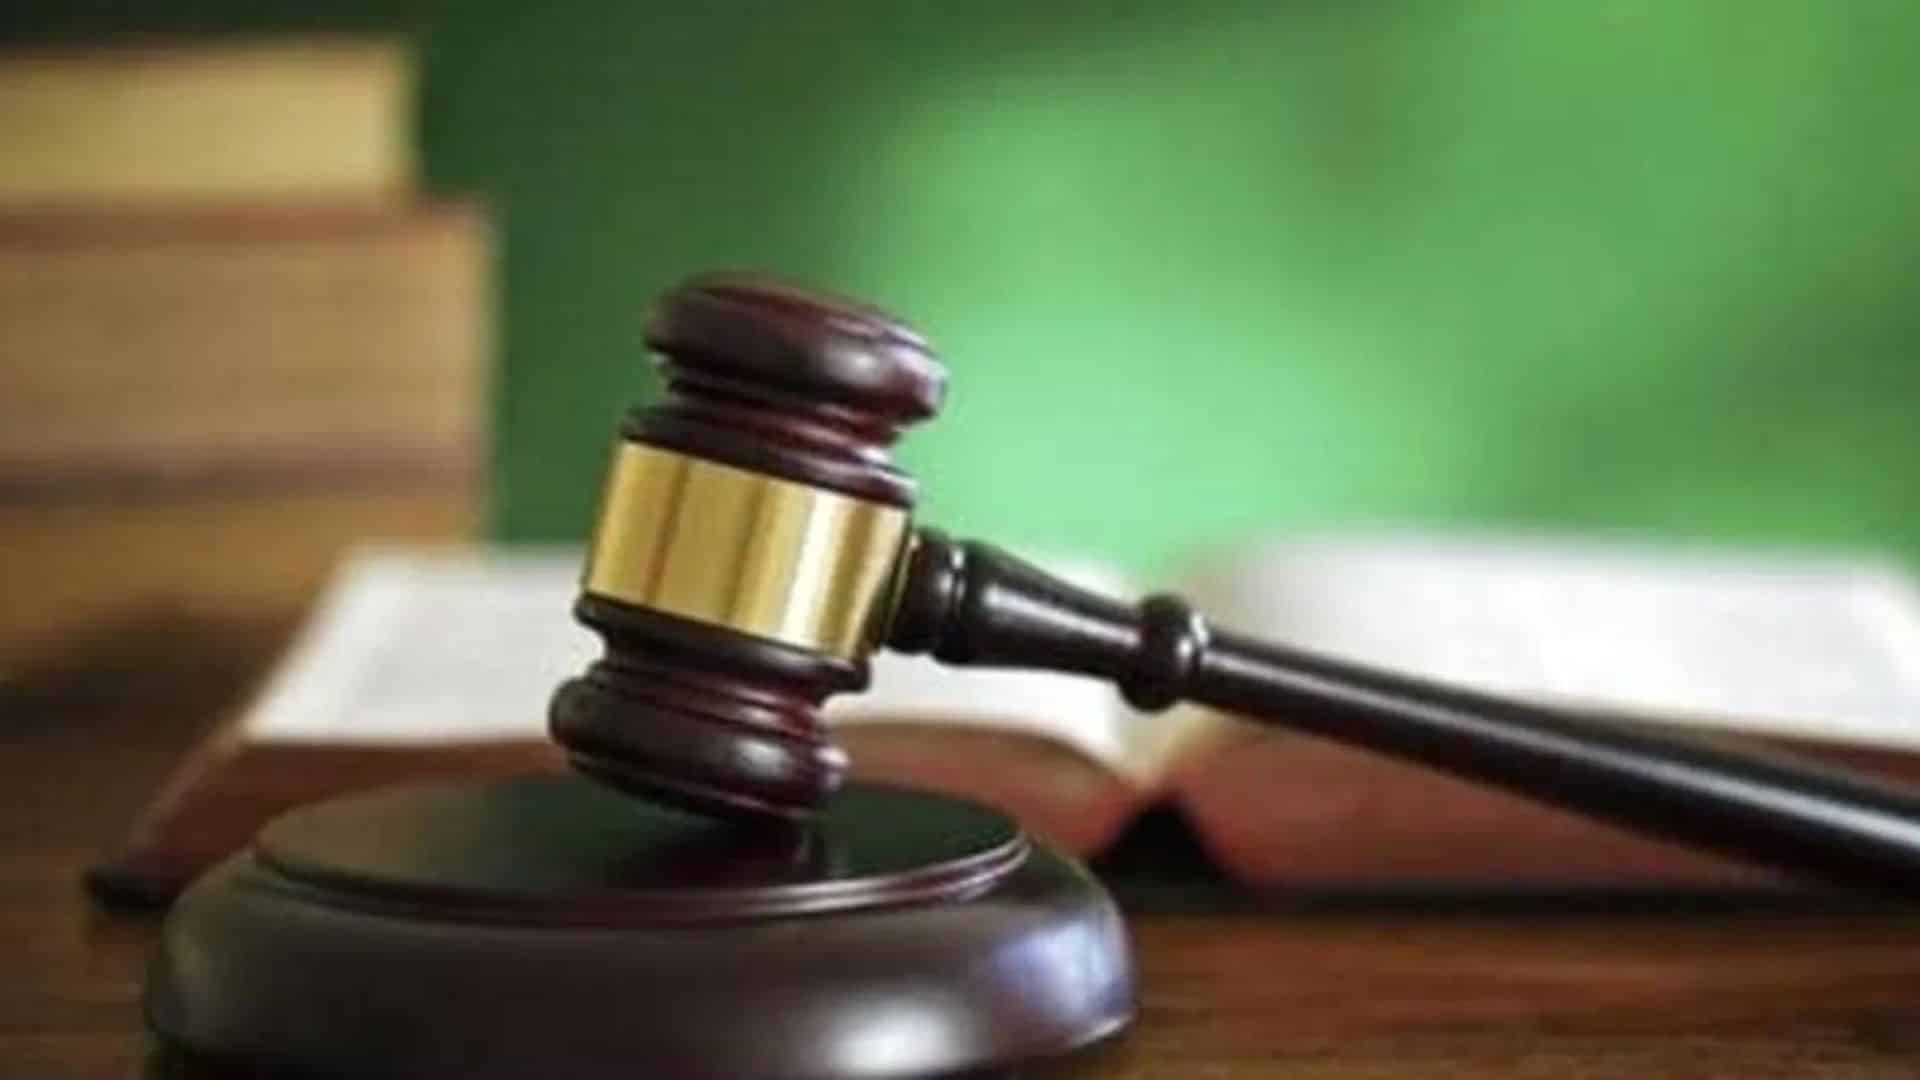 Pakistan Court Freed Rapist After ‘Agreement’ To Marry His Victim